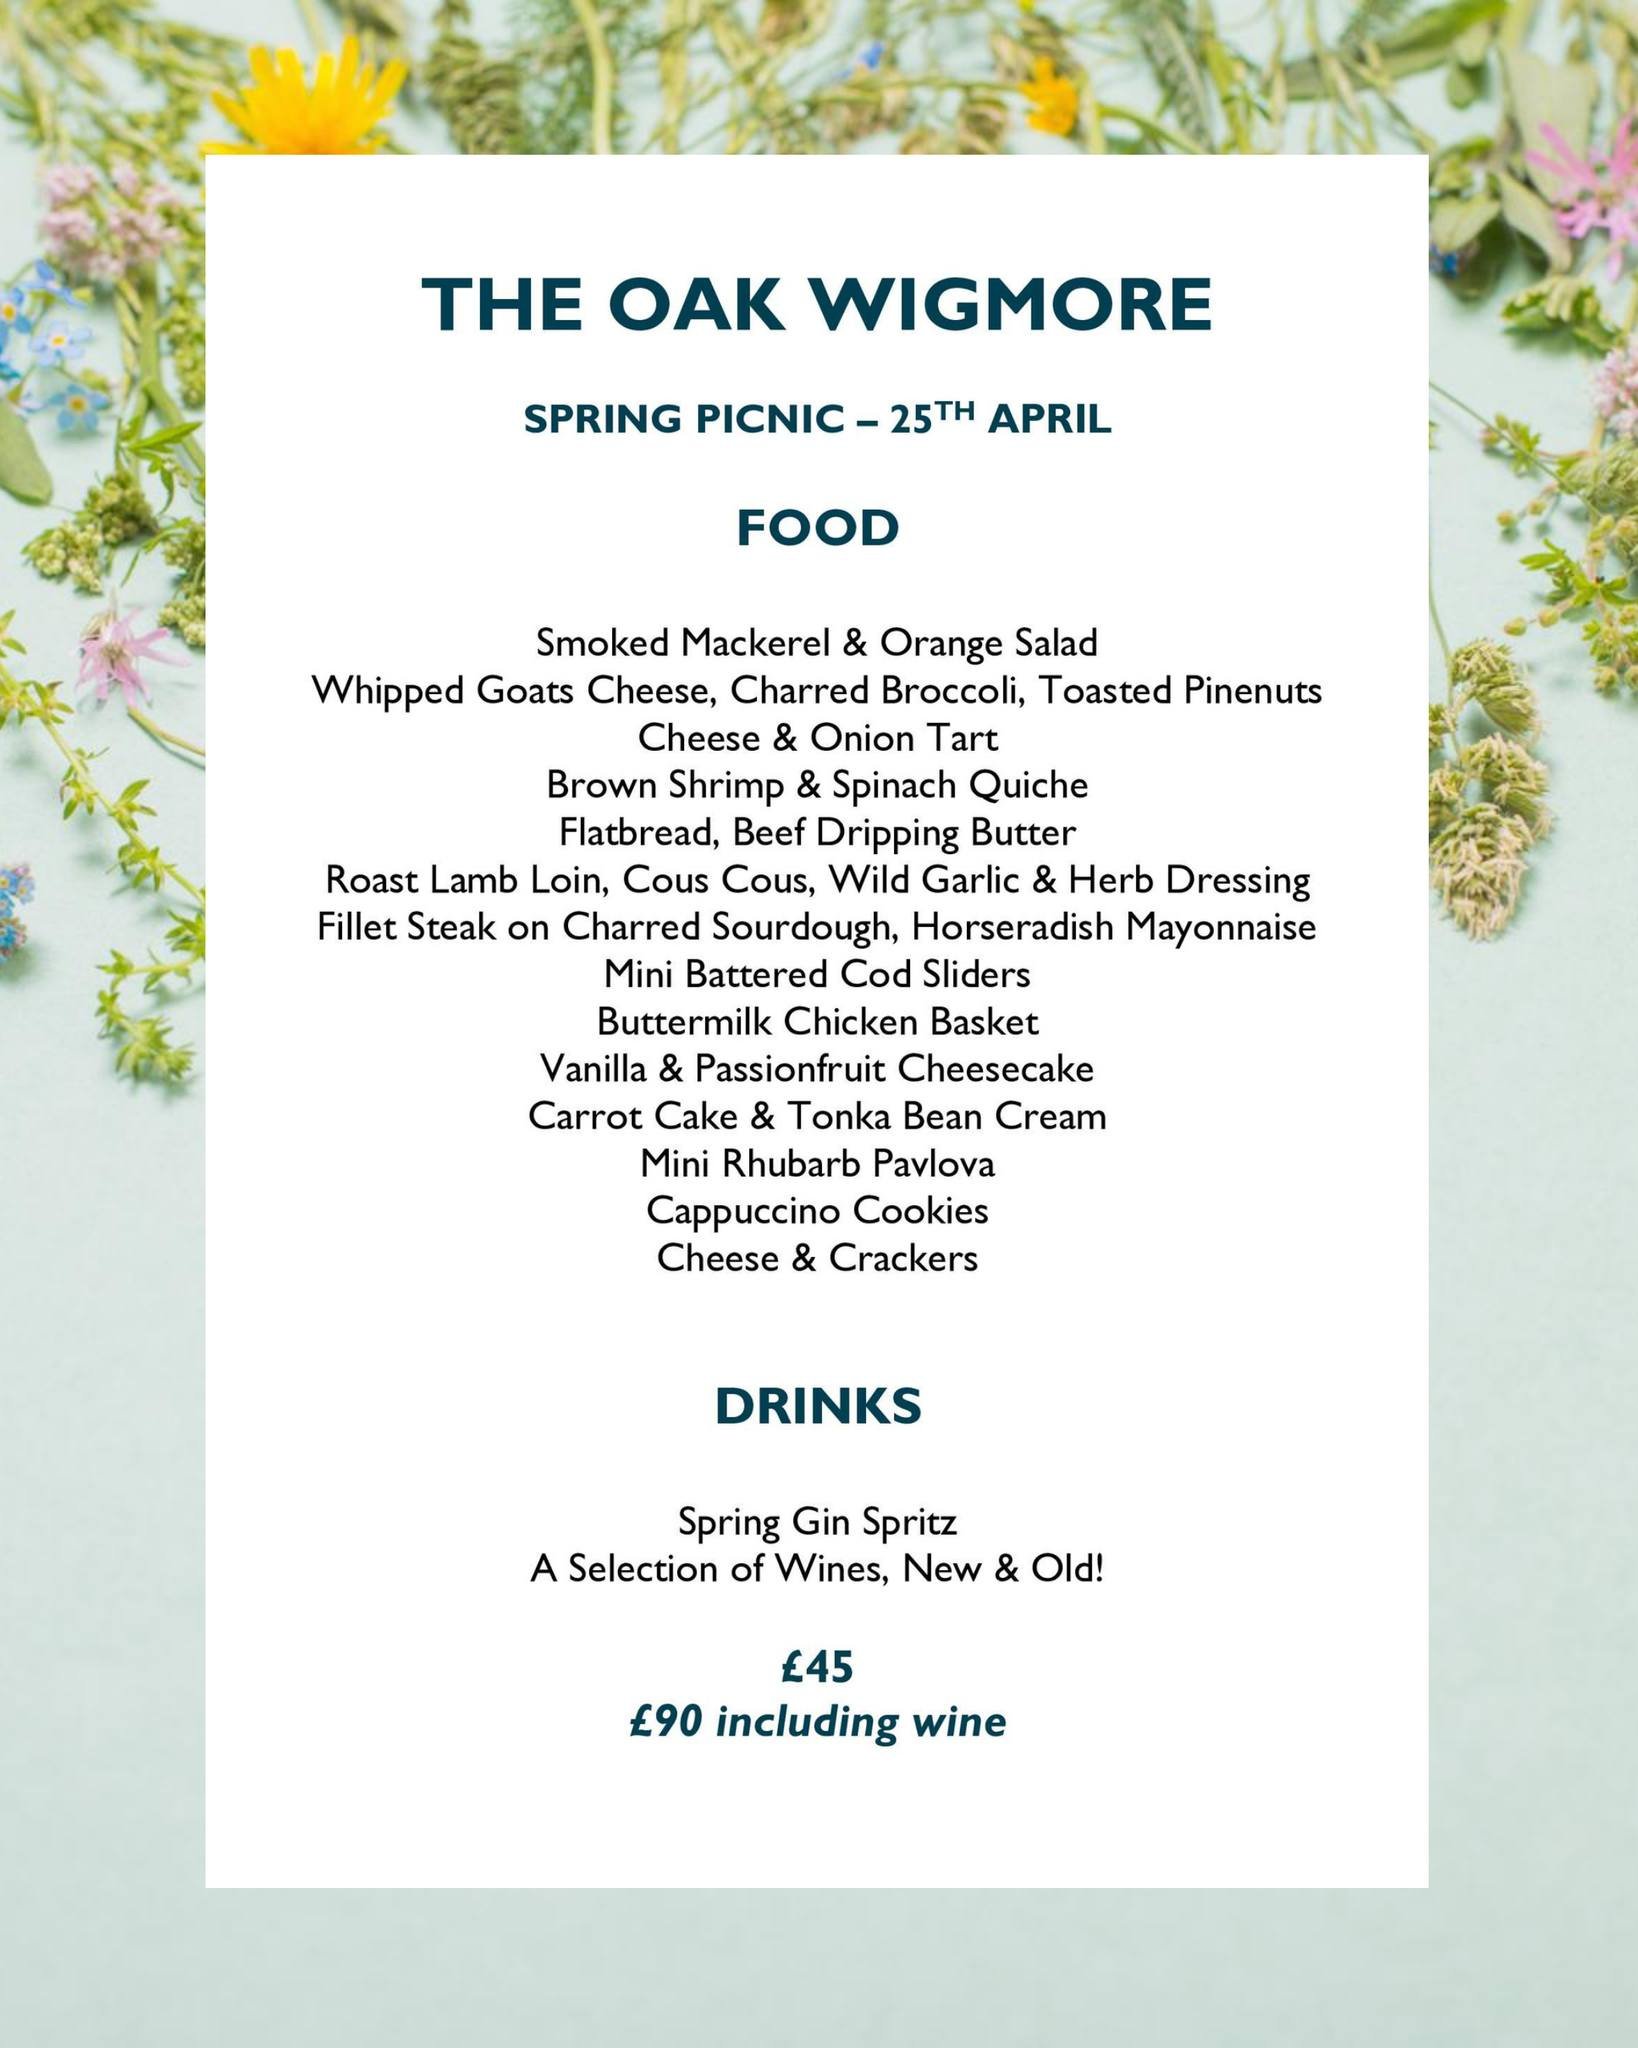 Join us on April 25th for an enchanting Spring Picnic Evening @ The Oak. We're crafting a new wine list &amp; need YOUR help to make it perfect!

Here's the twist - food is served family-style. Communal tables are set for mingling and encouraging con